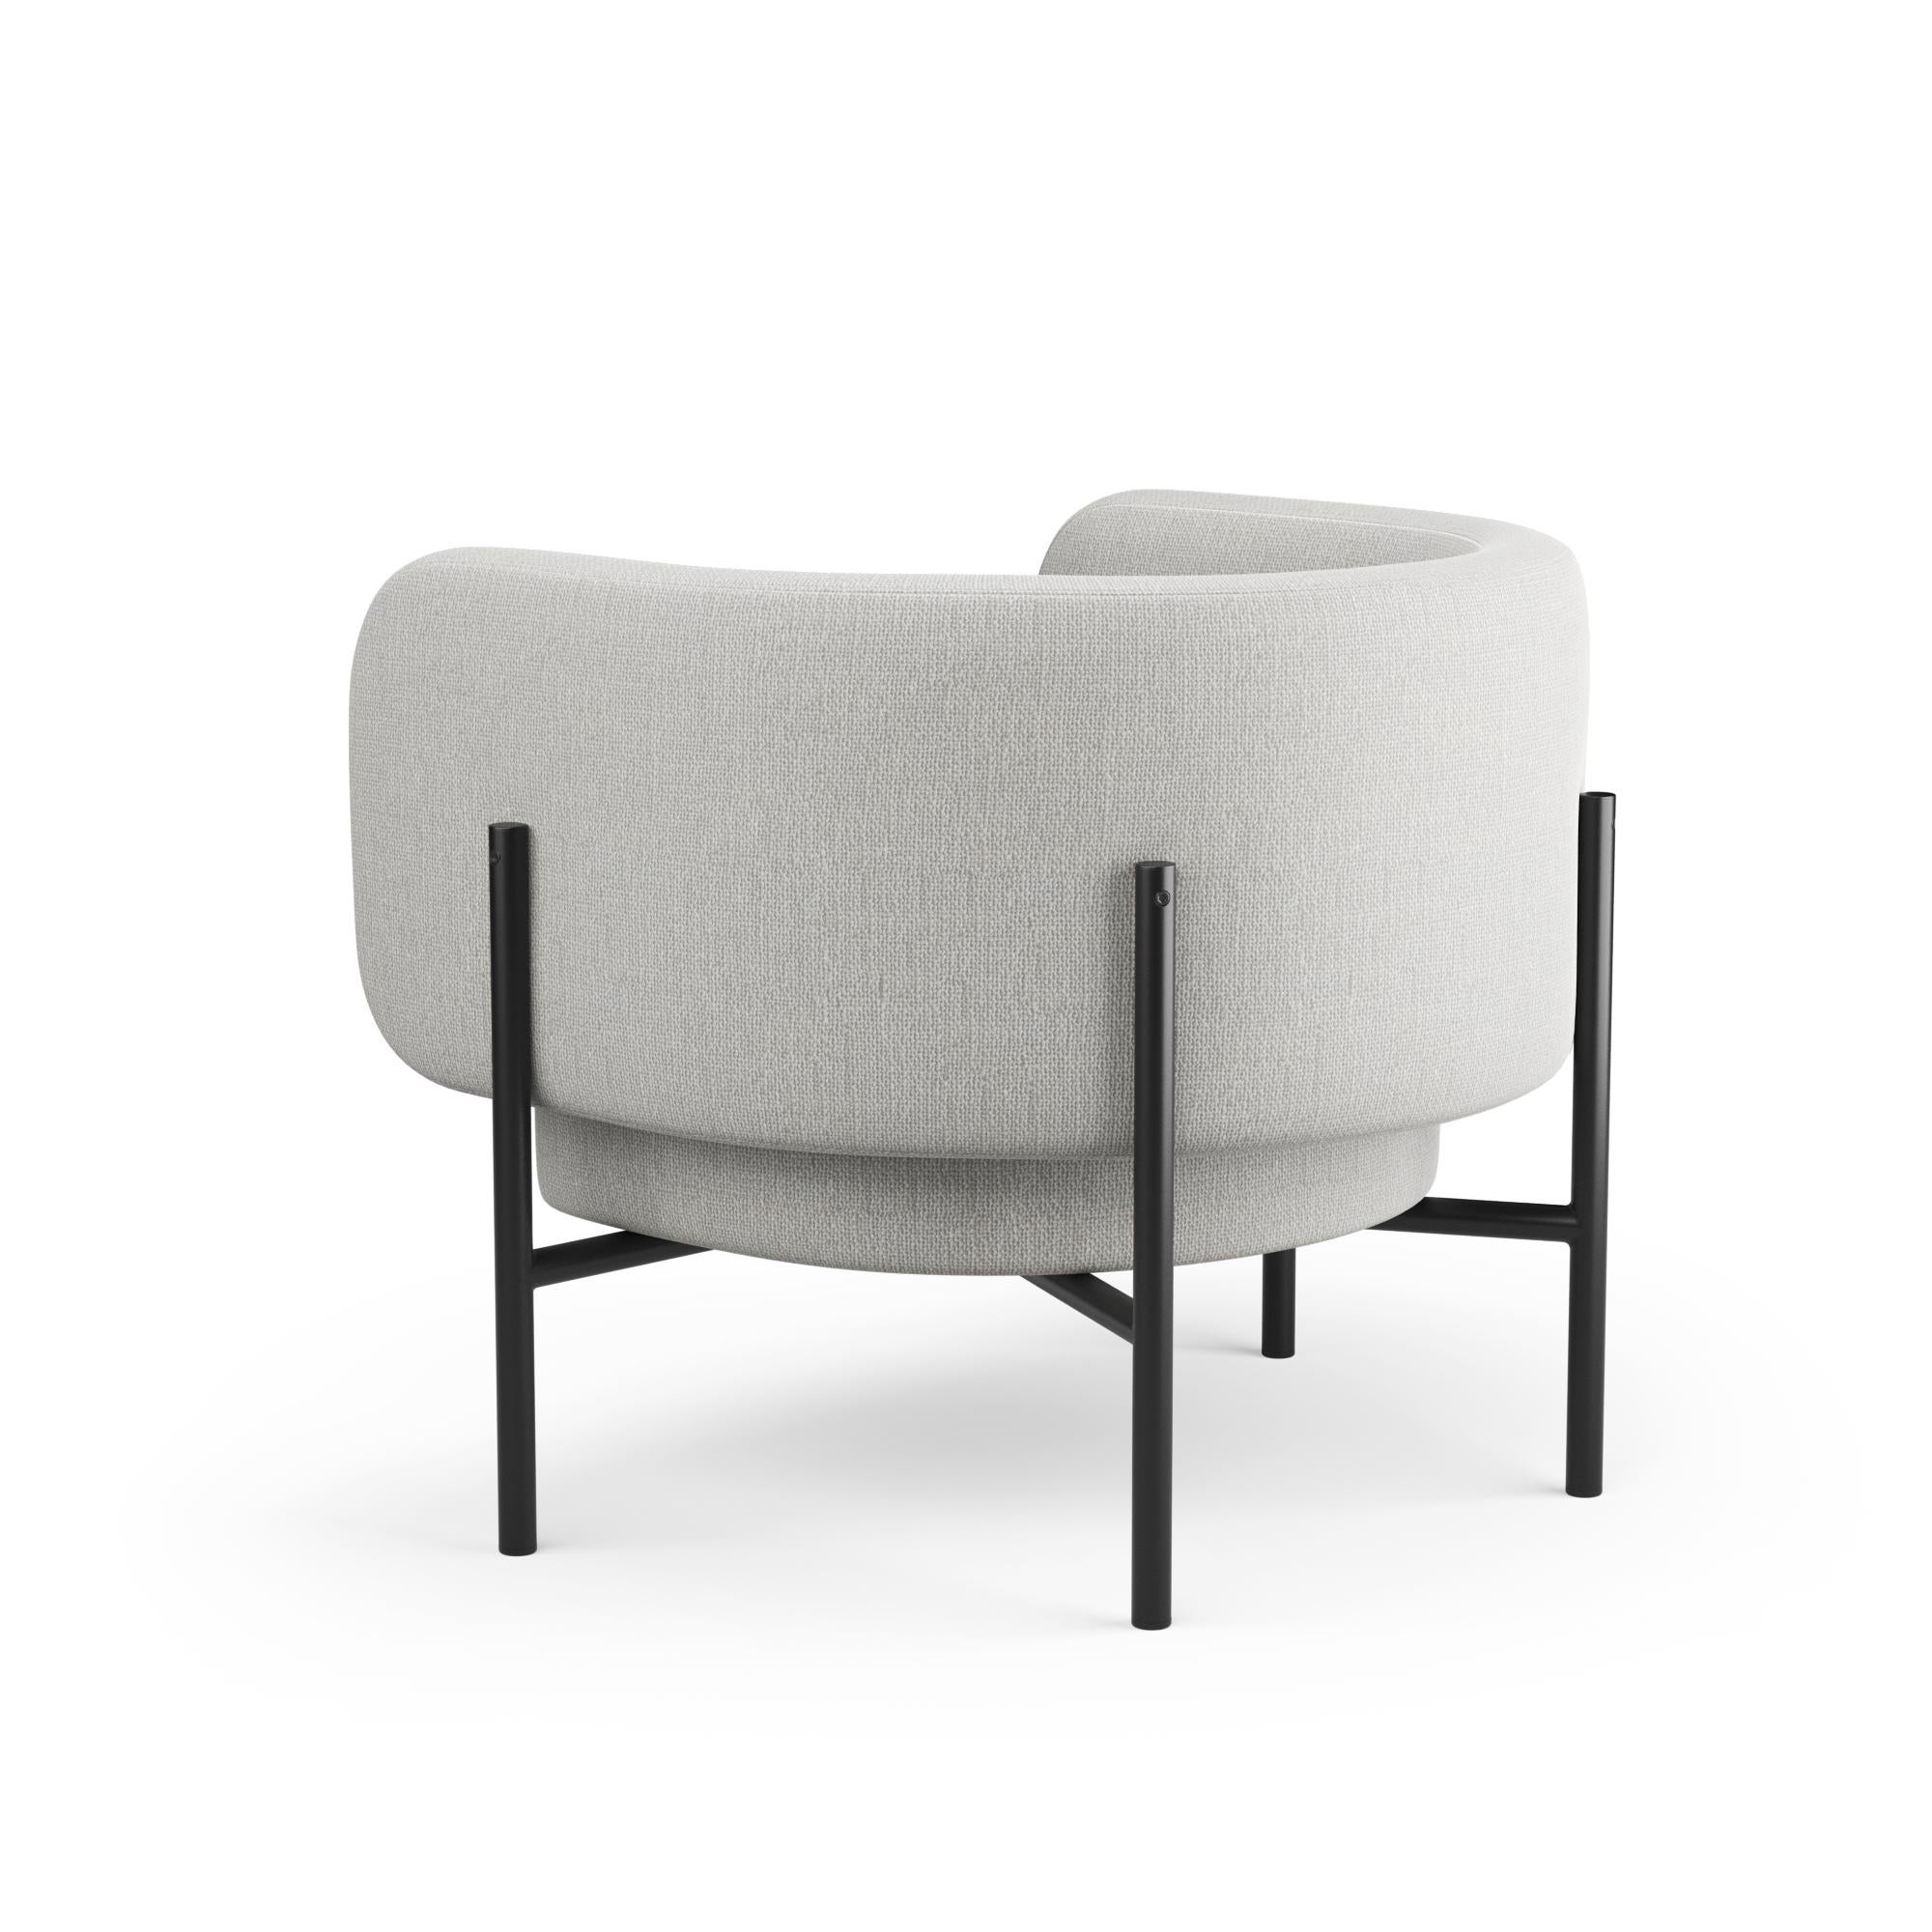 European Hayche Abrazo Armchair - Gravel, UK, Made to Order For Sale